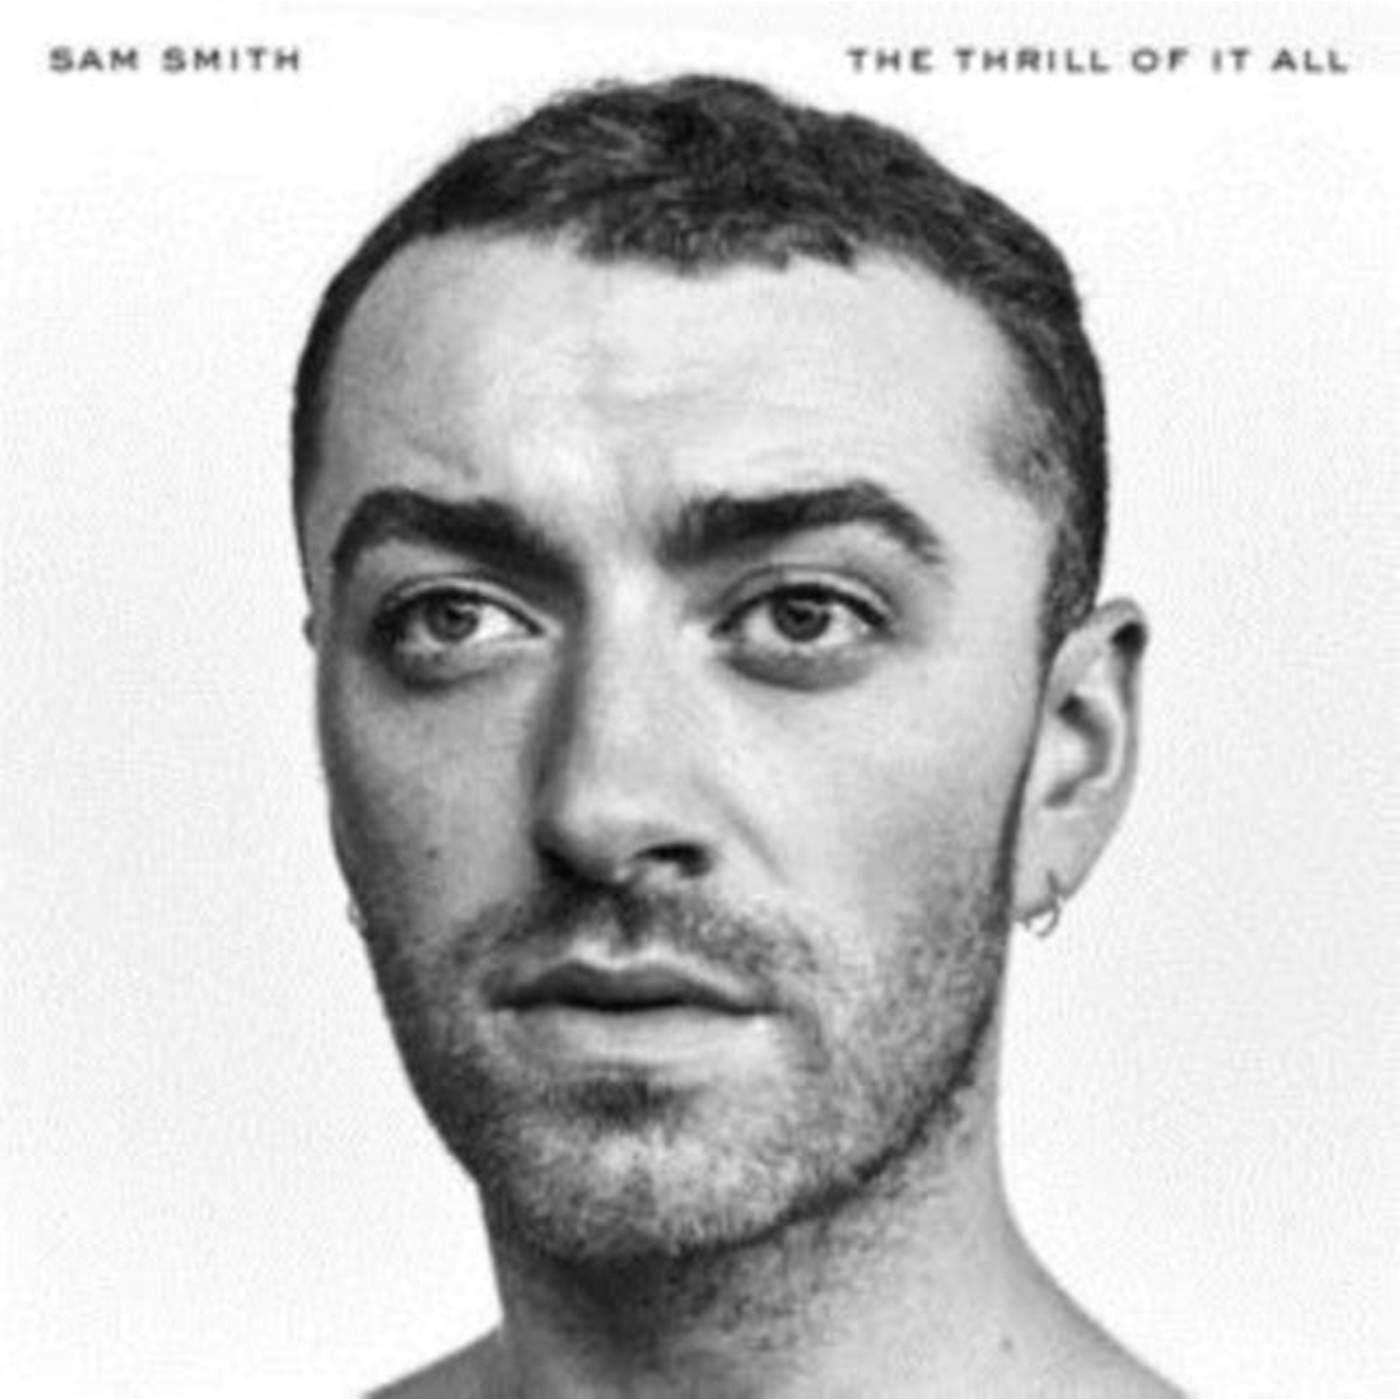 Sam Smith LP Vinyl Record - The Thrill Of It All